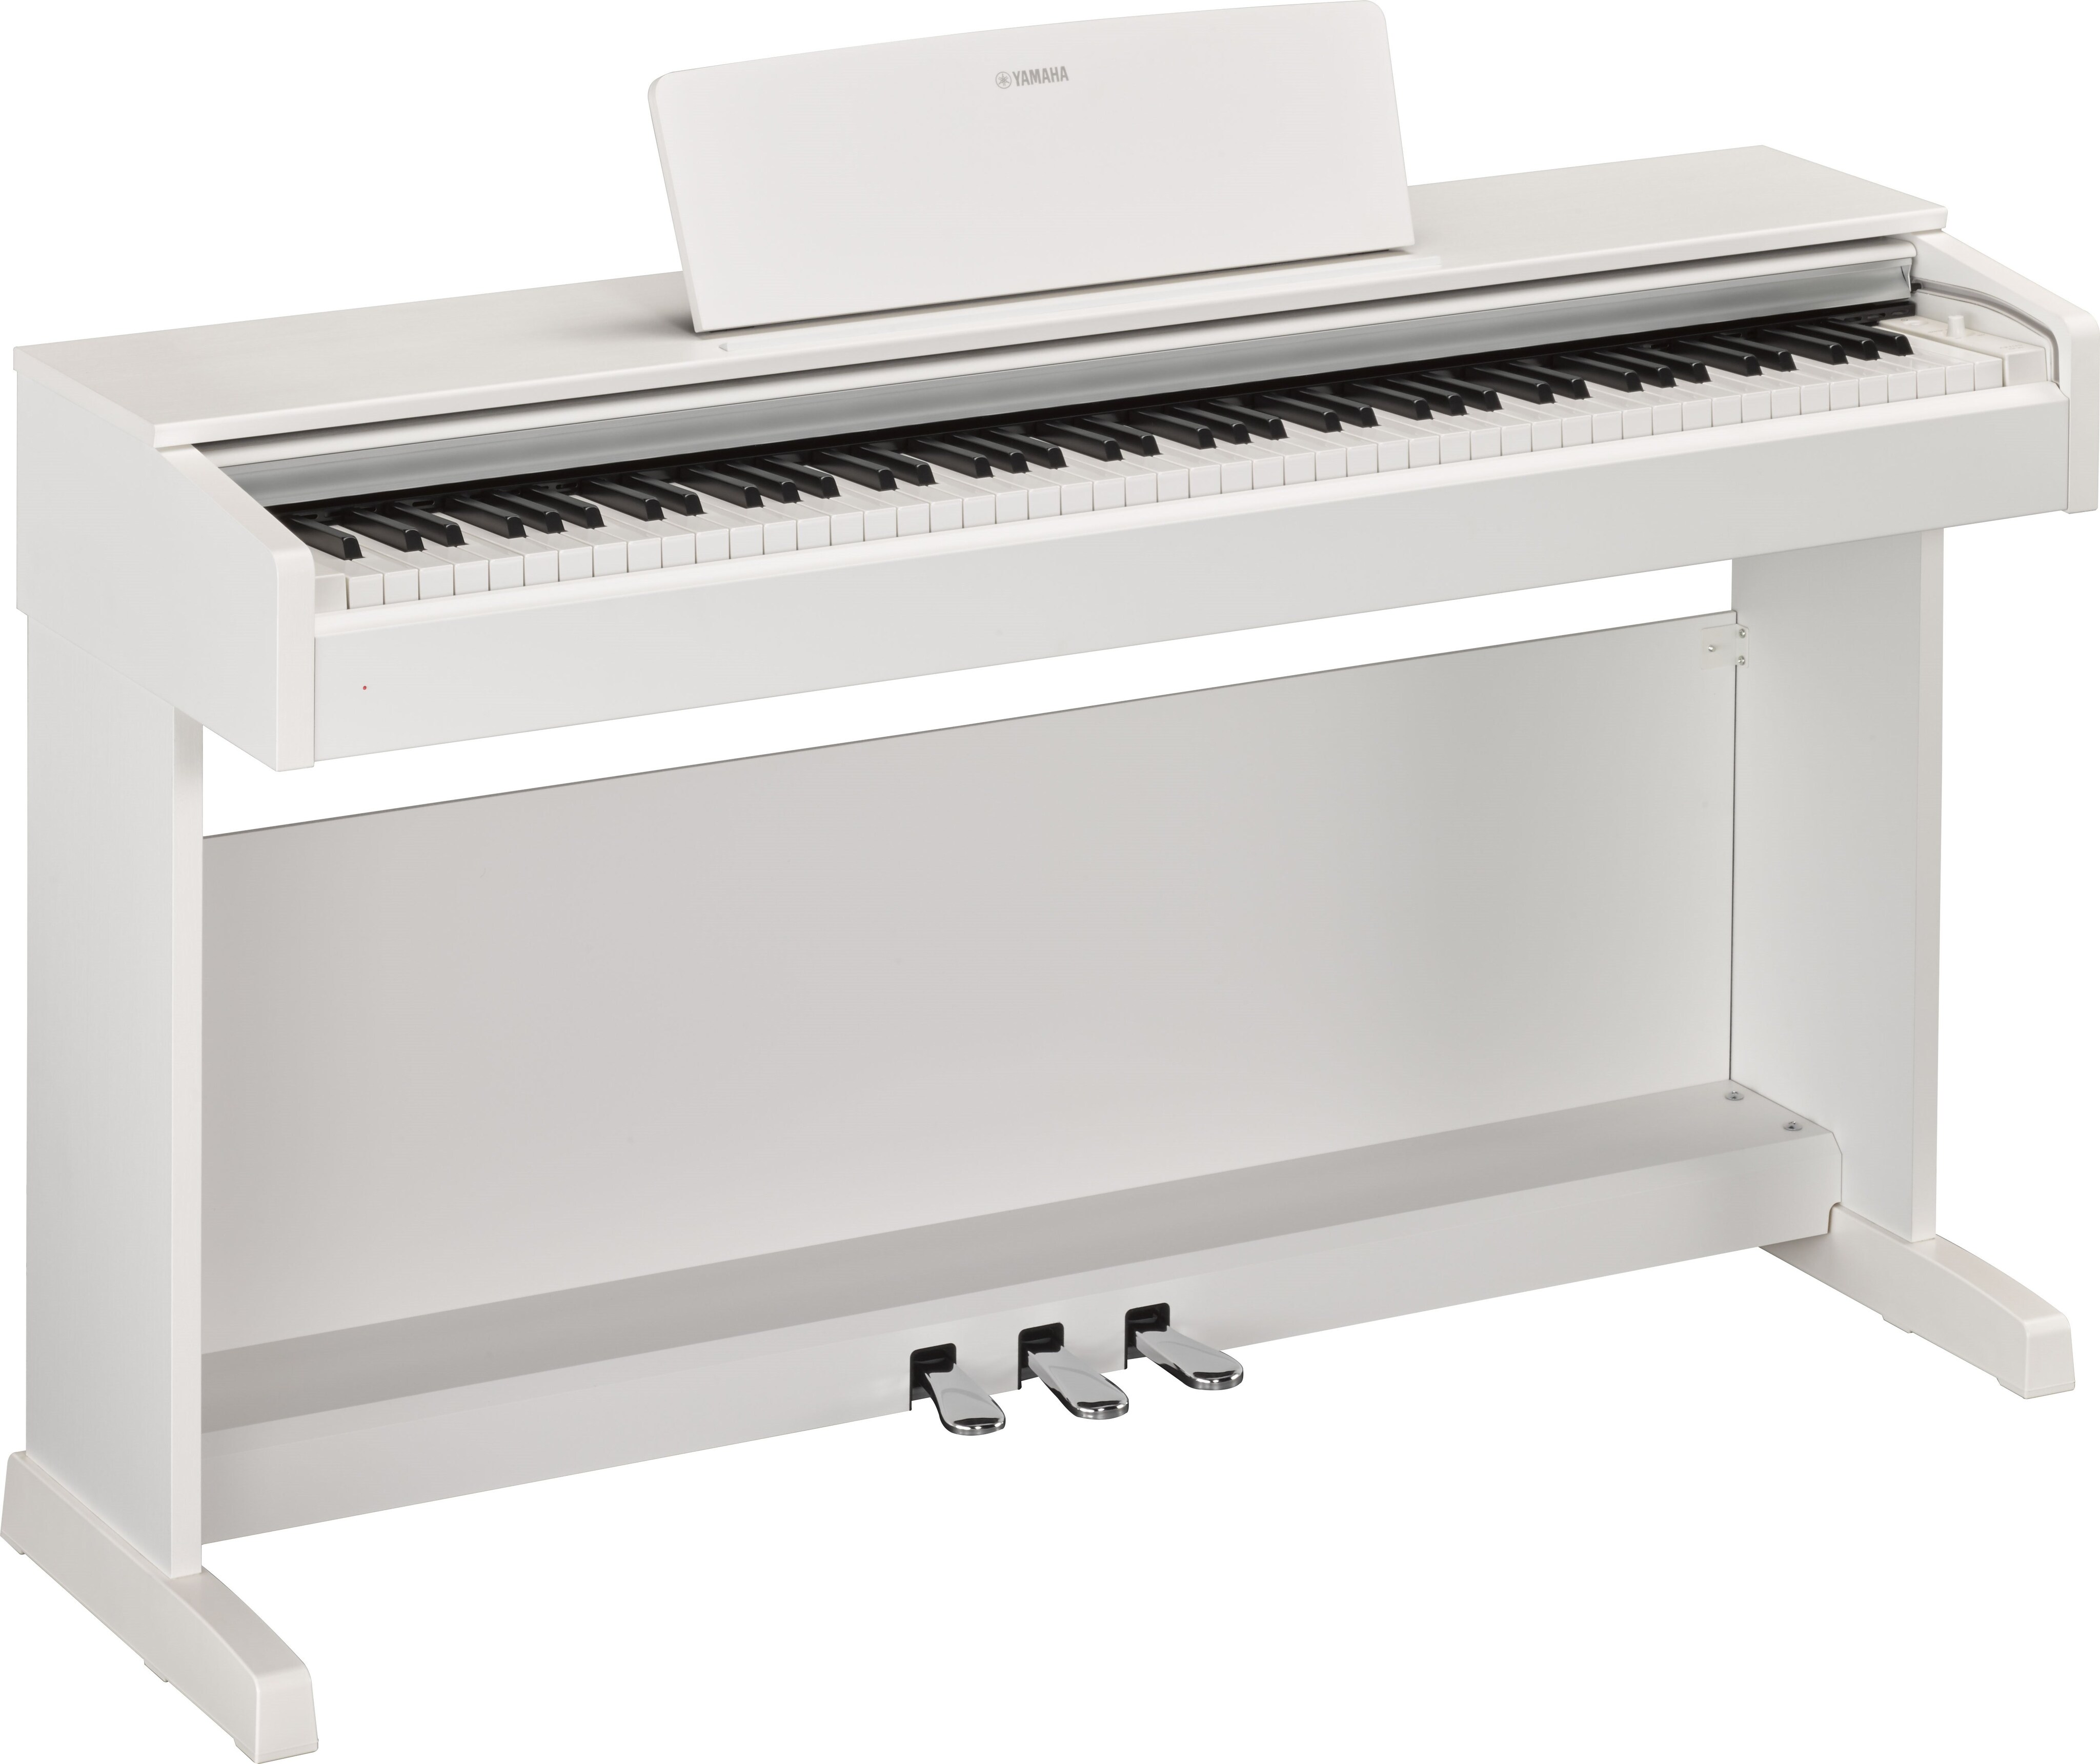 YDP-143 - Overview - ARIUS - Pianos - Musical Instruments